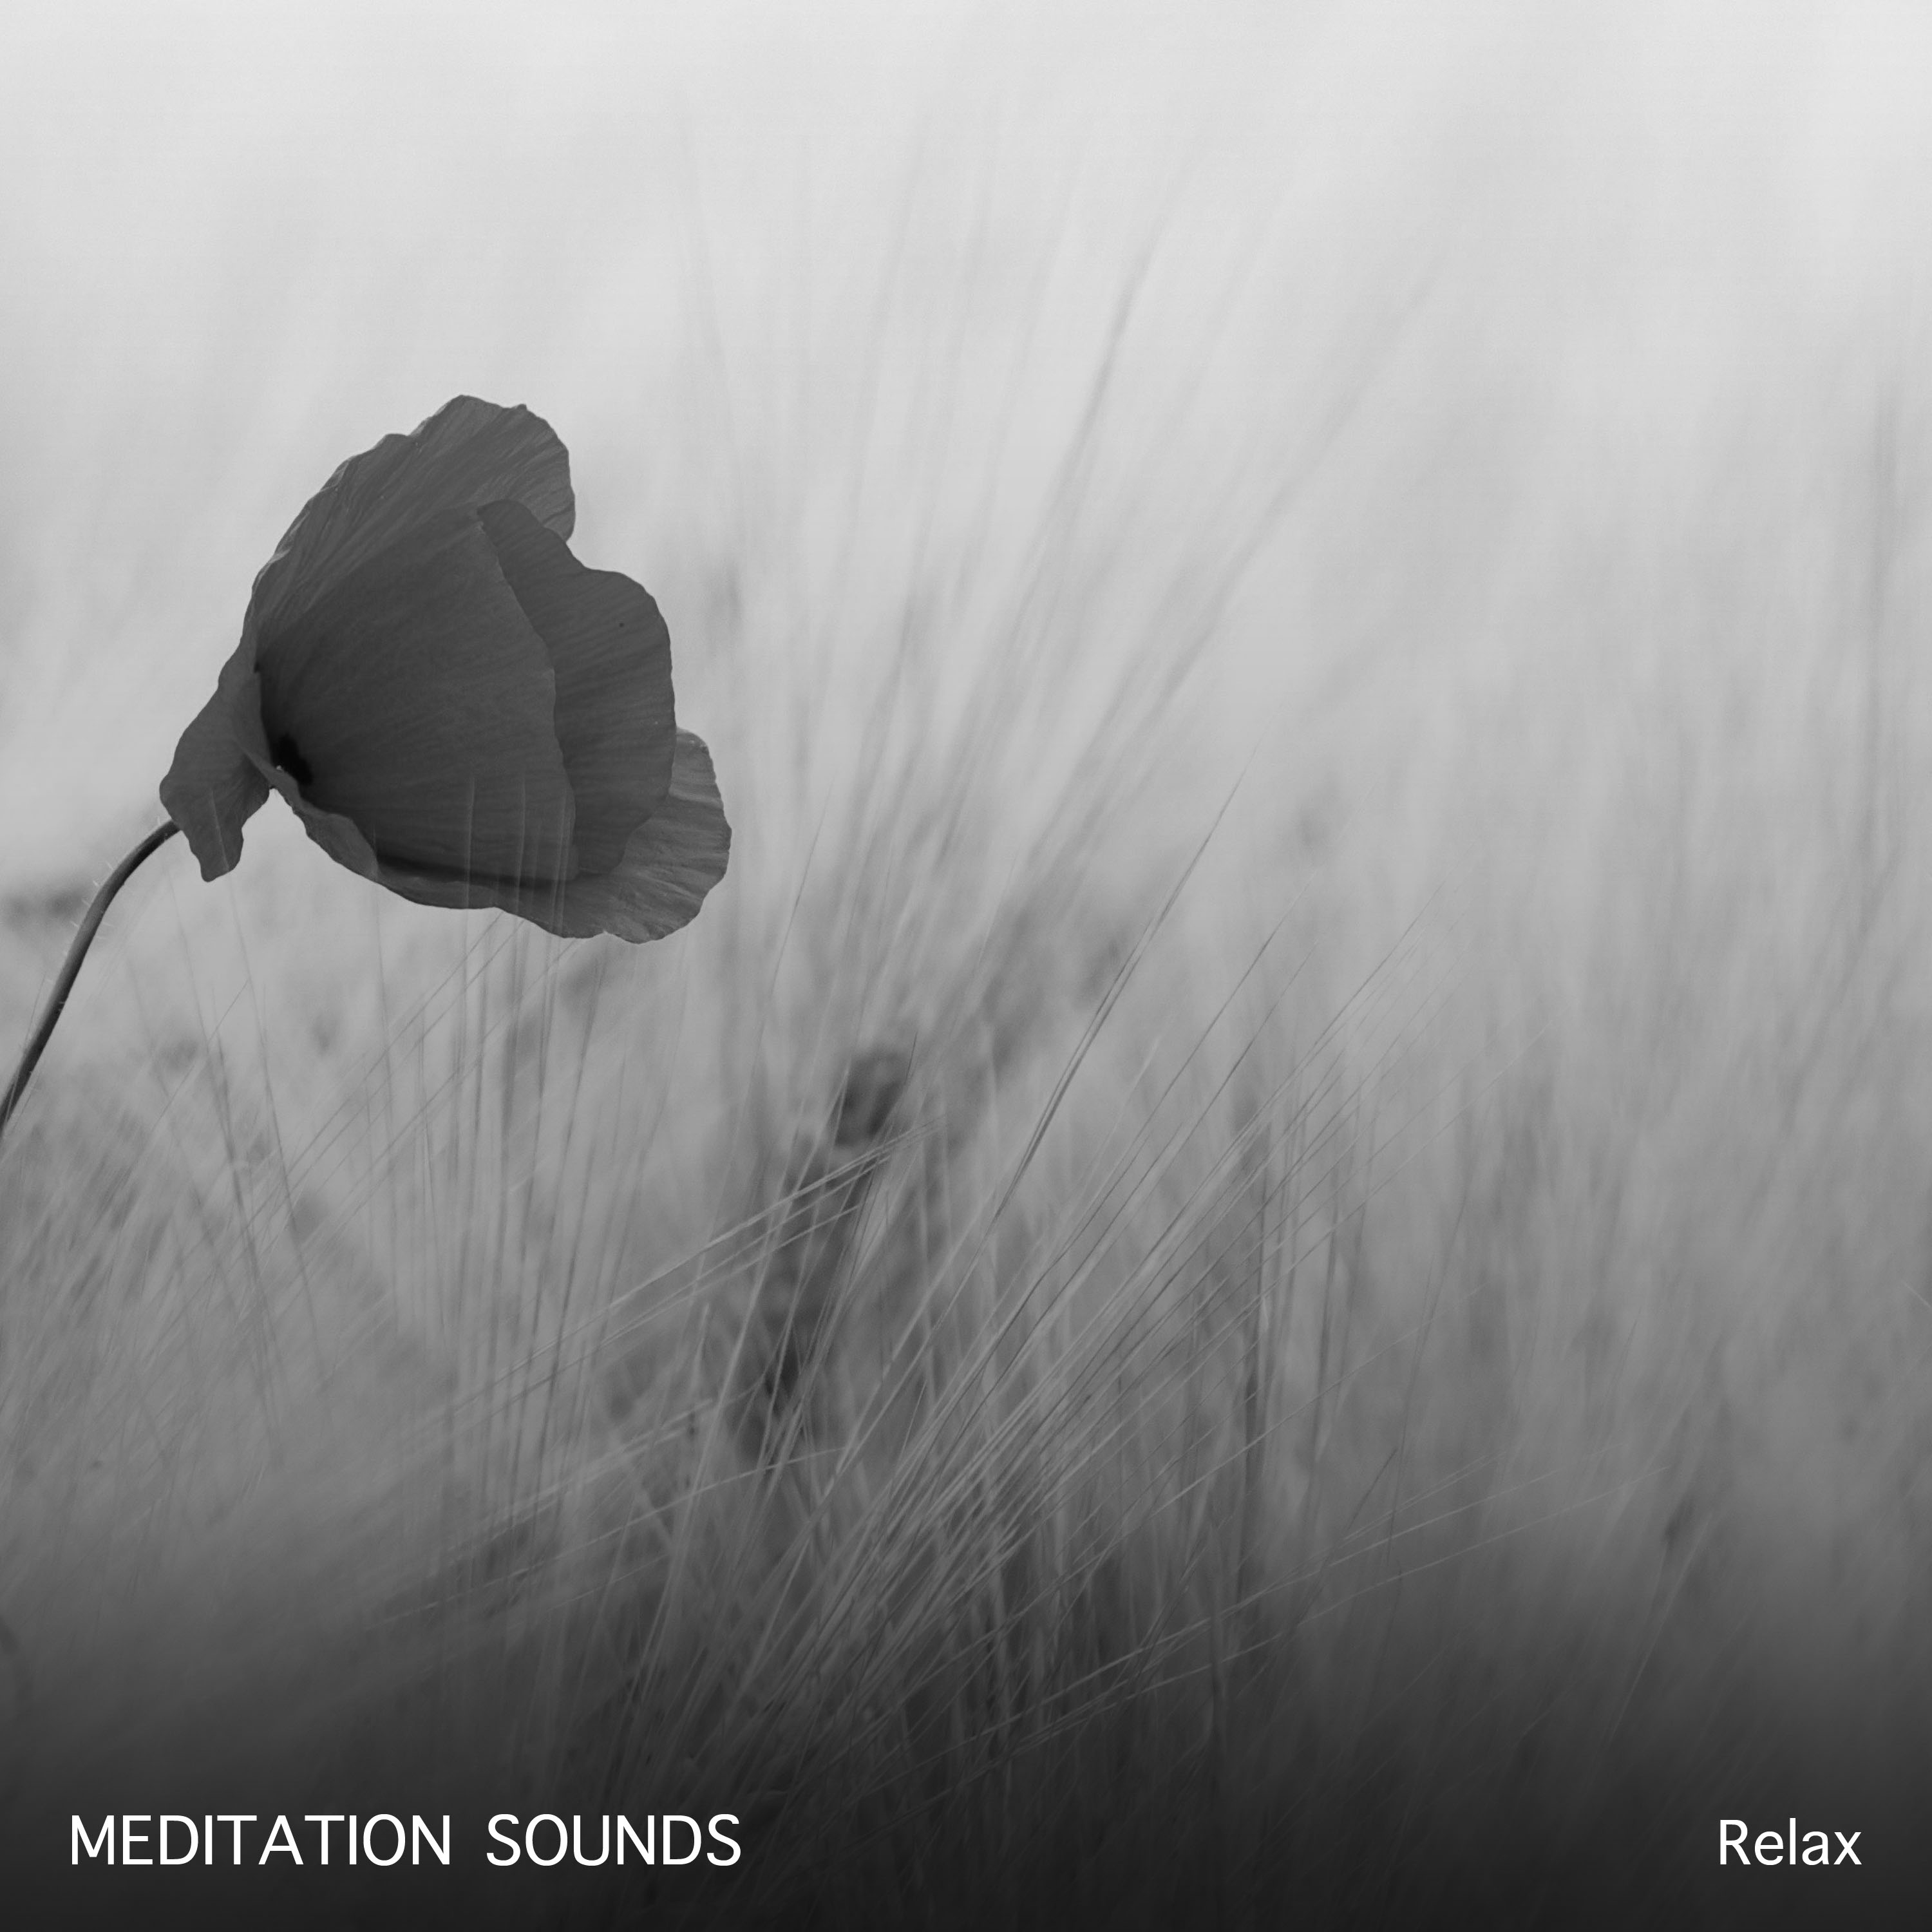 20 Meditation Sounds from Around the World: Relax